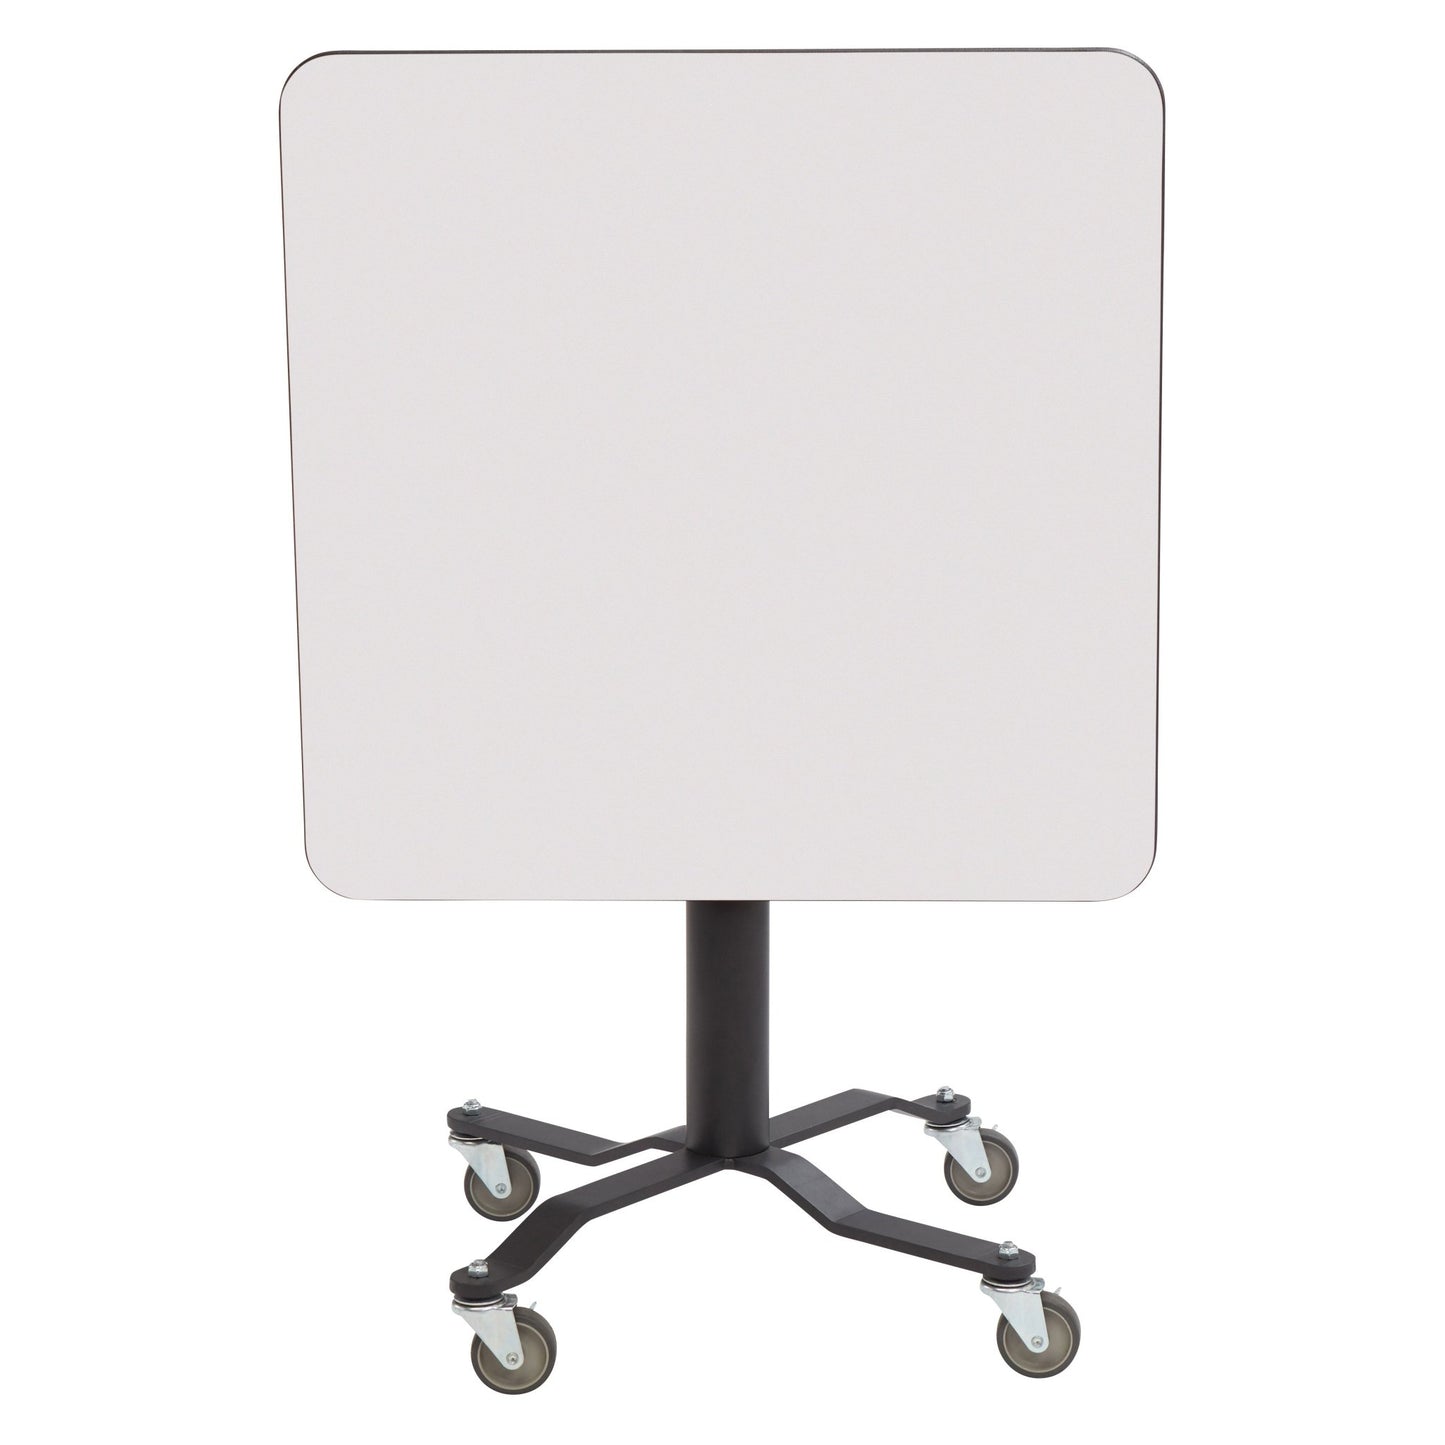 NPS Cafe Time II Table, 36" Square, Whiteboard Top, Particle Board, Vinyl T-Molding (National Public Seating NPS-PCT336PBTMWB) - SchoolOutlet